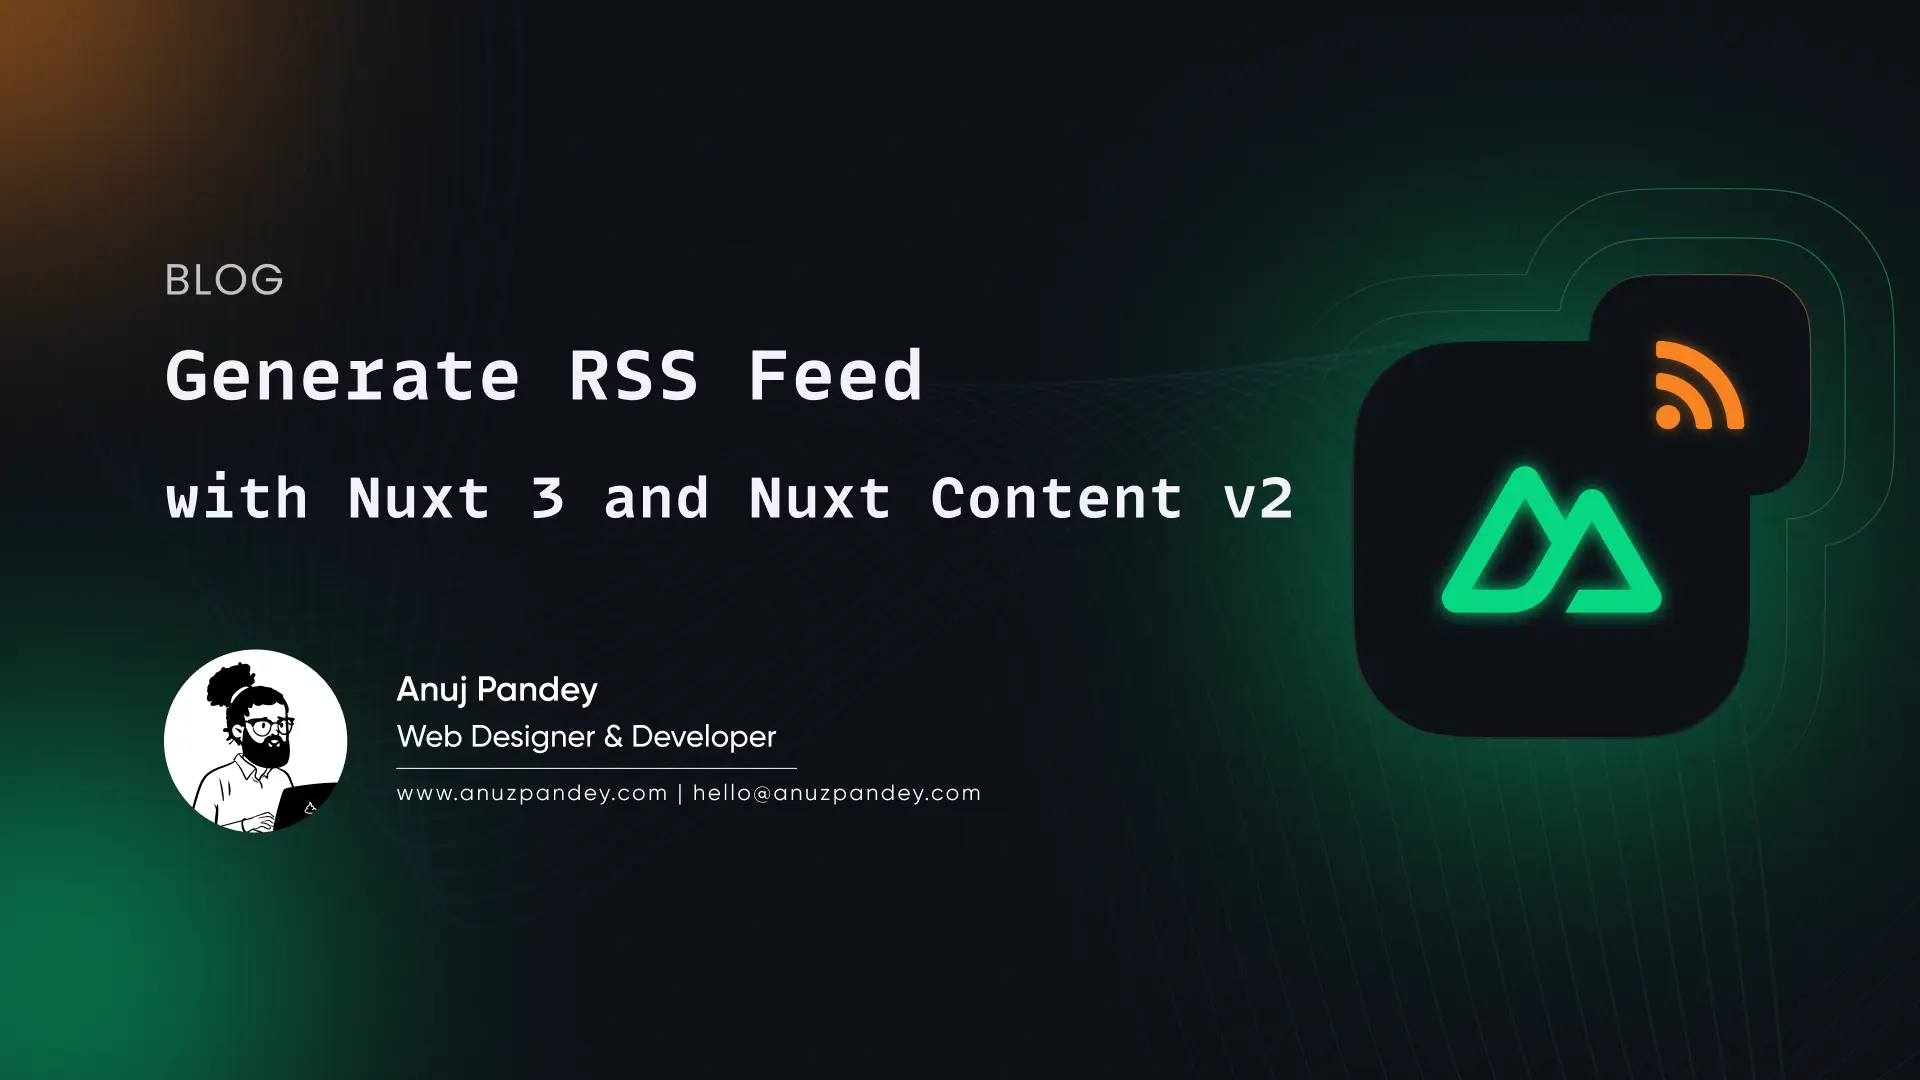 Generate RSS Feed with Nuxt 3 and Nuxt Content v2